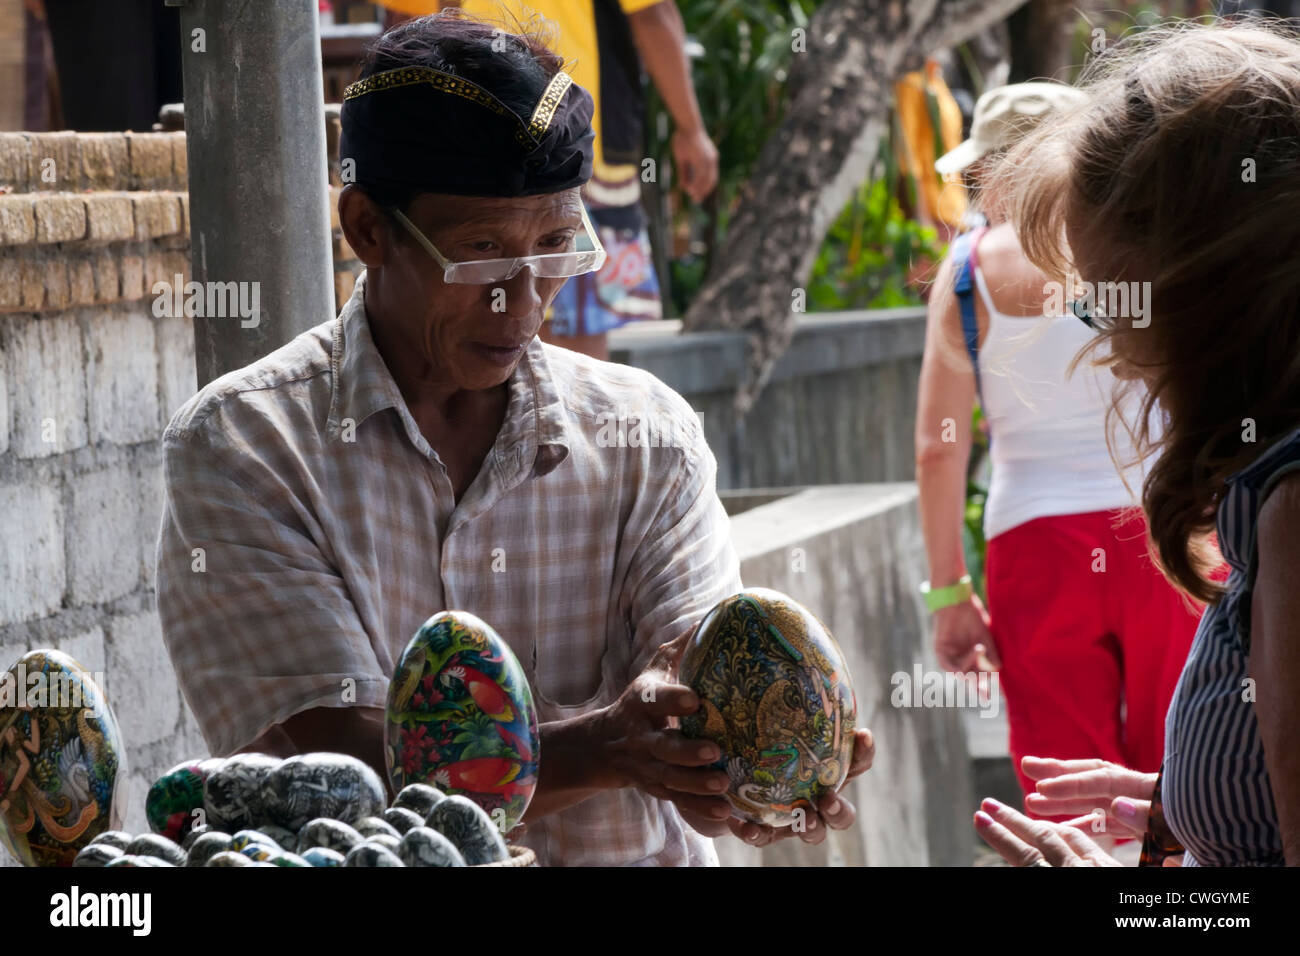 Tourist bartering with vendor in Bali Stock Photo